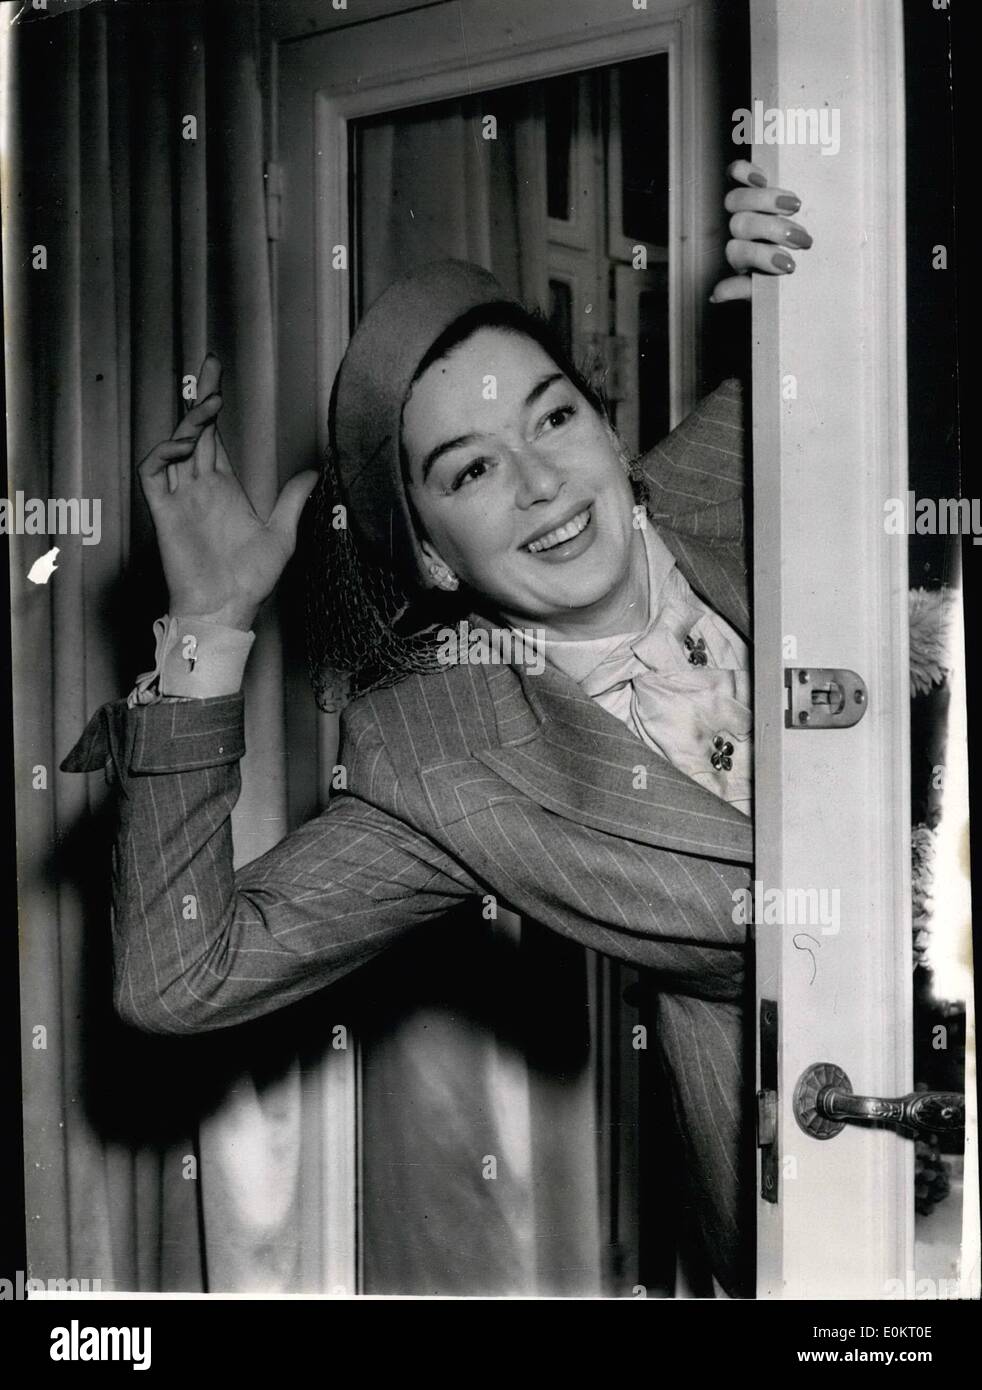 Nov. 11, 1949 - Rosalind Russell At The Savoy Screen Star Says ''Good Morning'' : Screen star Rosalind Russell who is here for next week's Royal Command Show (Film) waves a greeting - at the Savoy Hotel this morning. Stock Photo